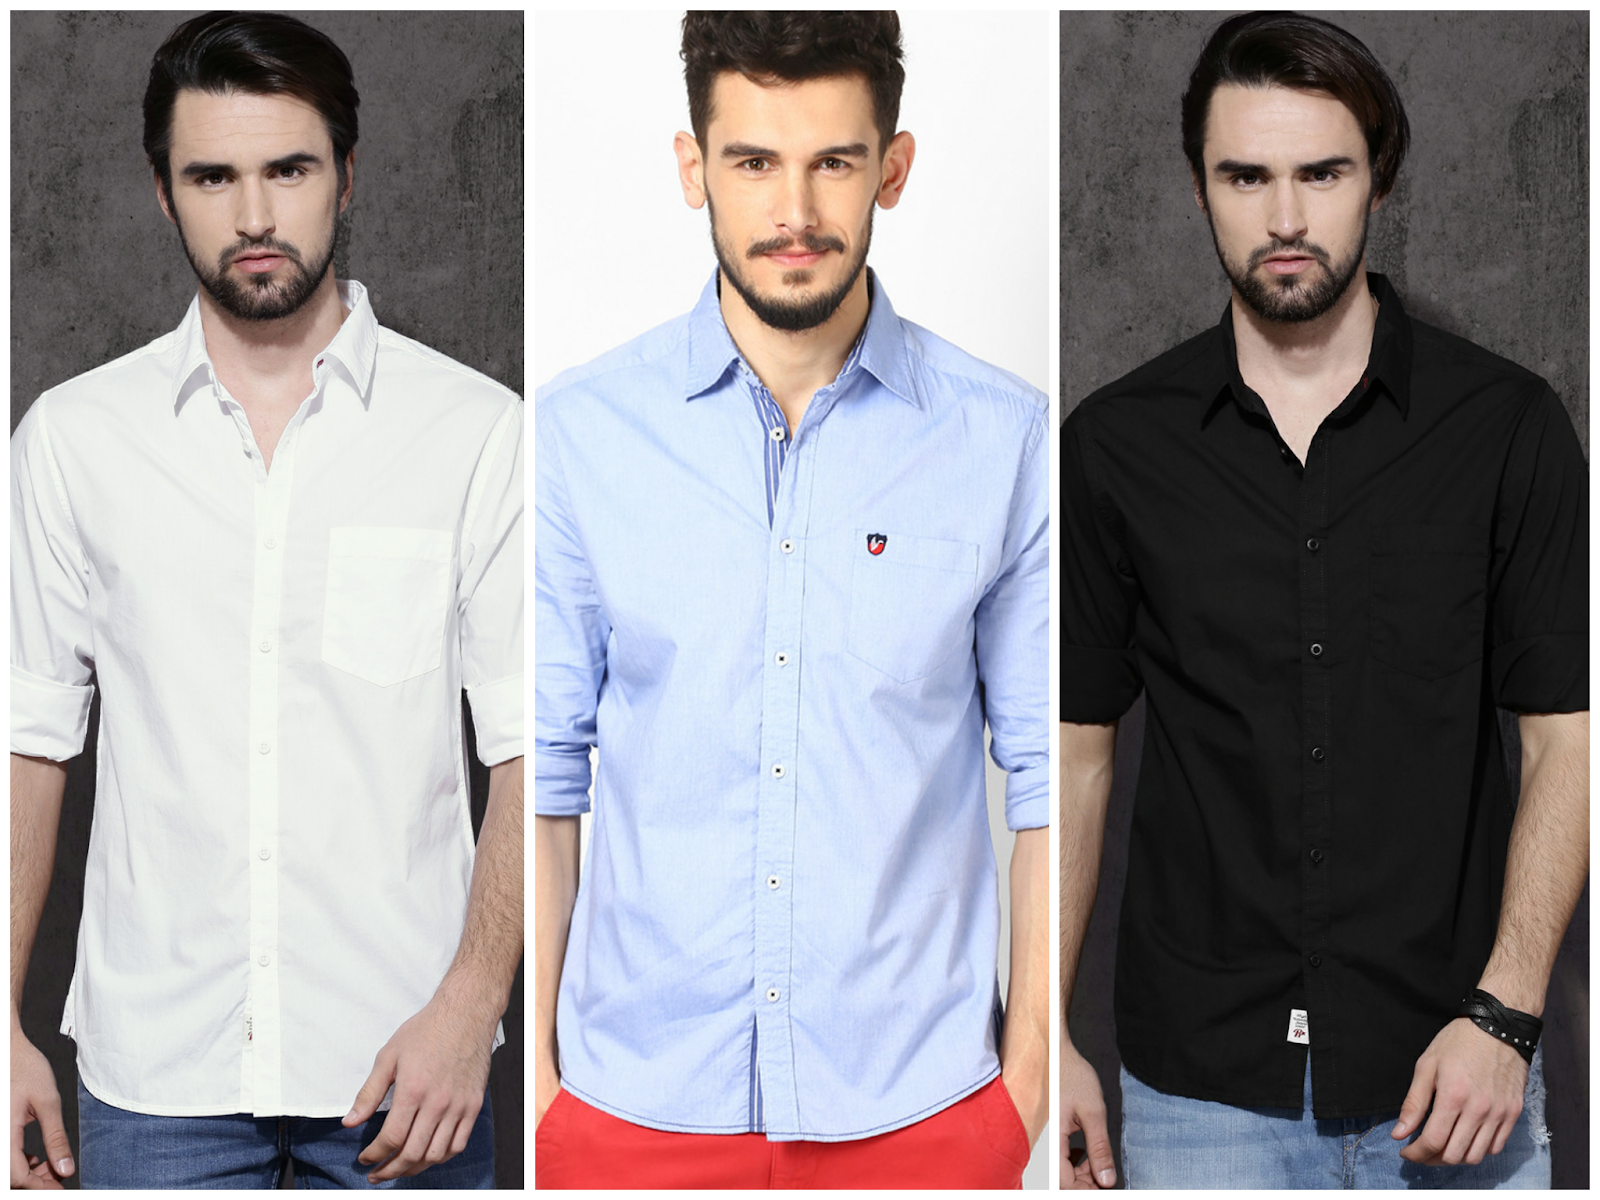 Top 5 shirt wearing tips that will make you Stud of your group